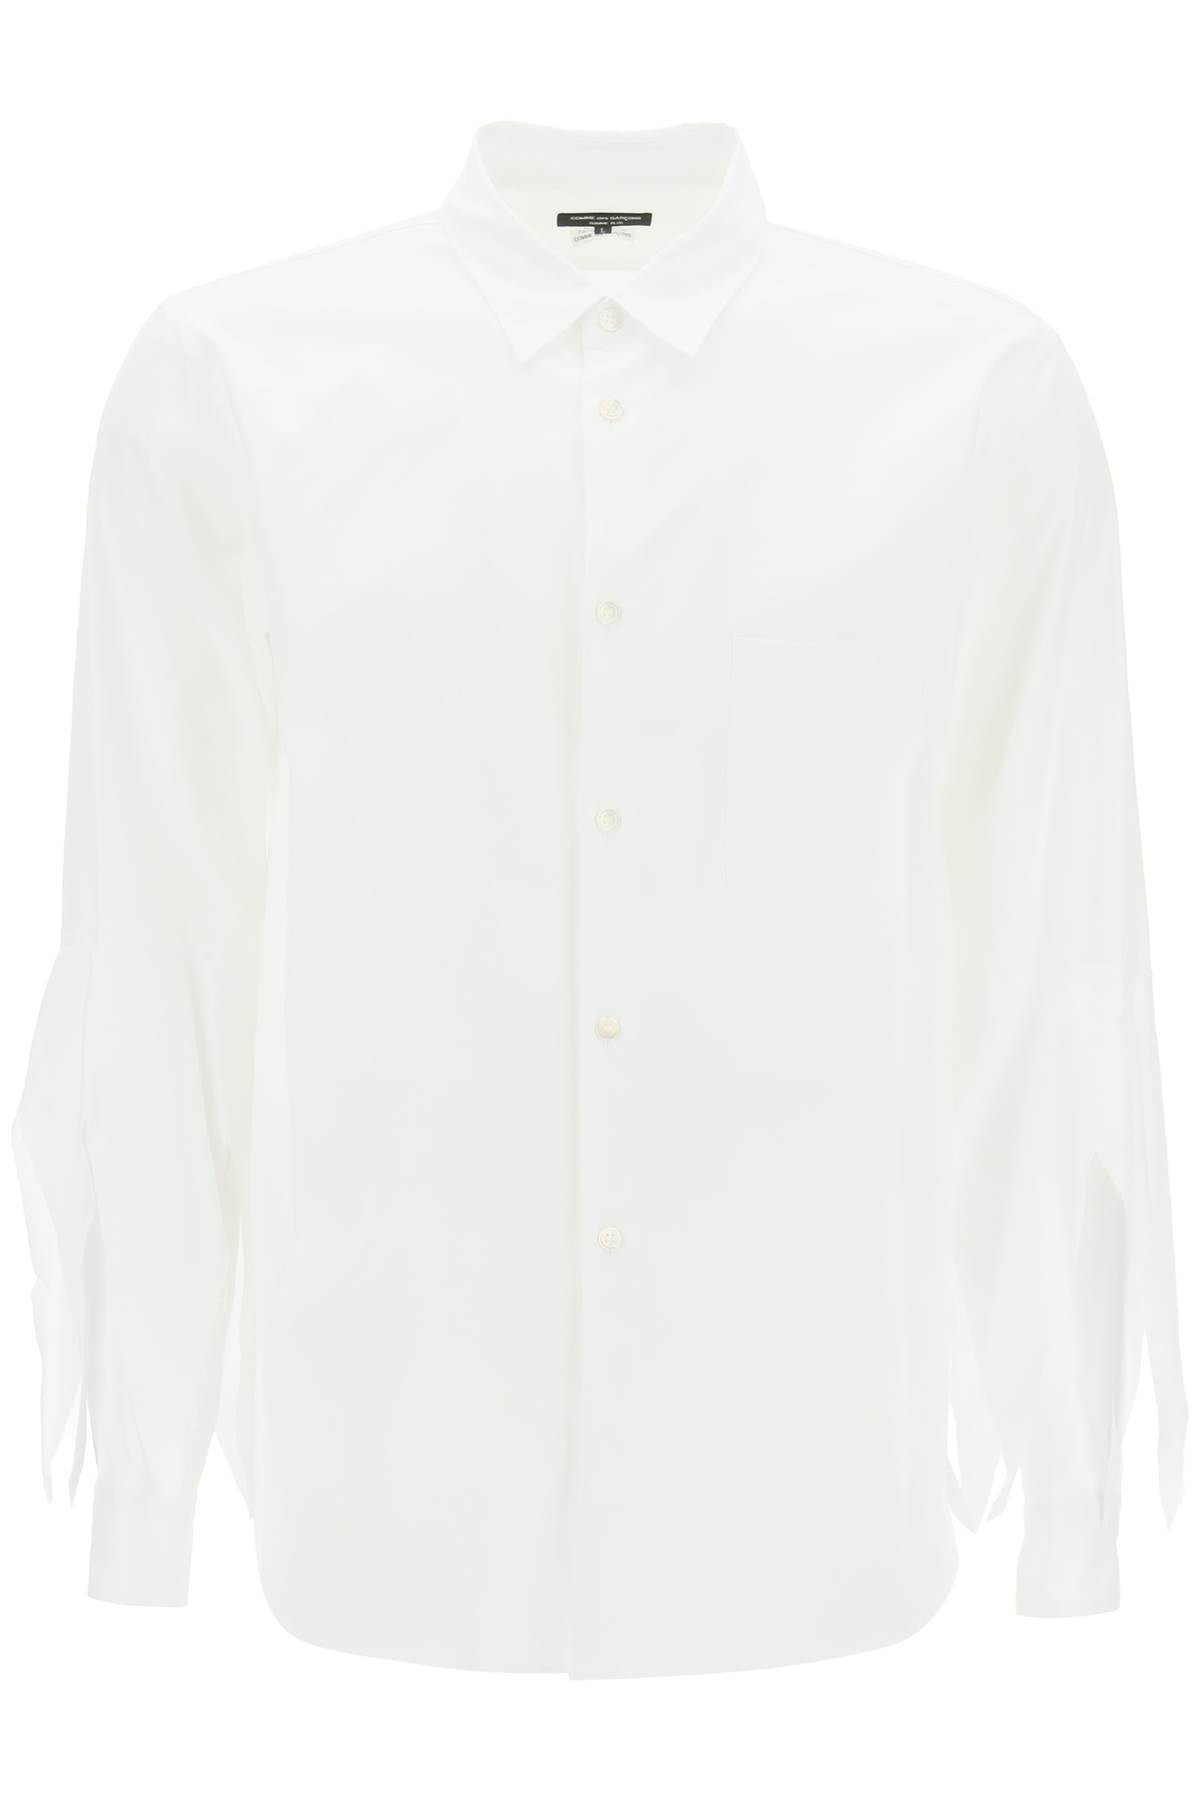 Comme des garcons homme plus spiked frayed-sleeved shirt-0